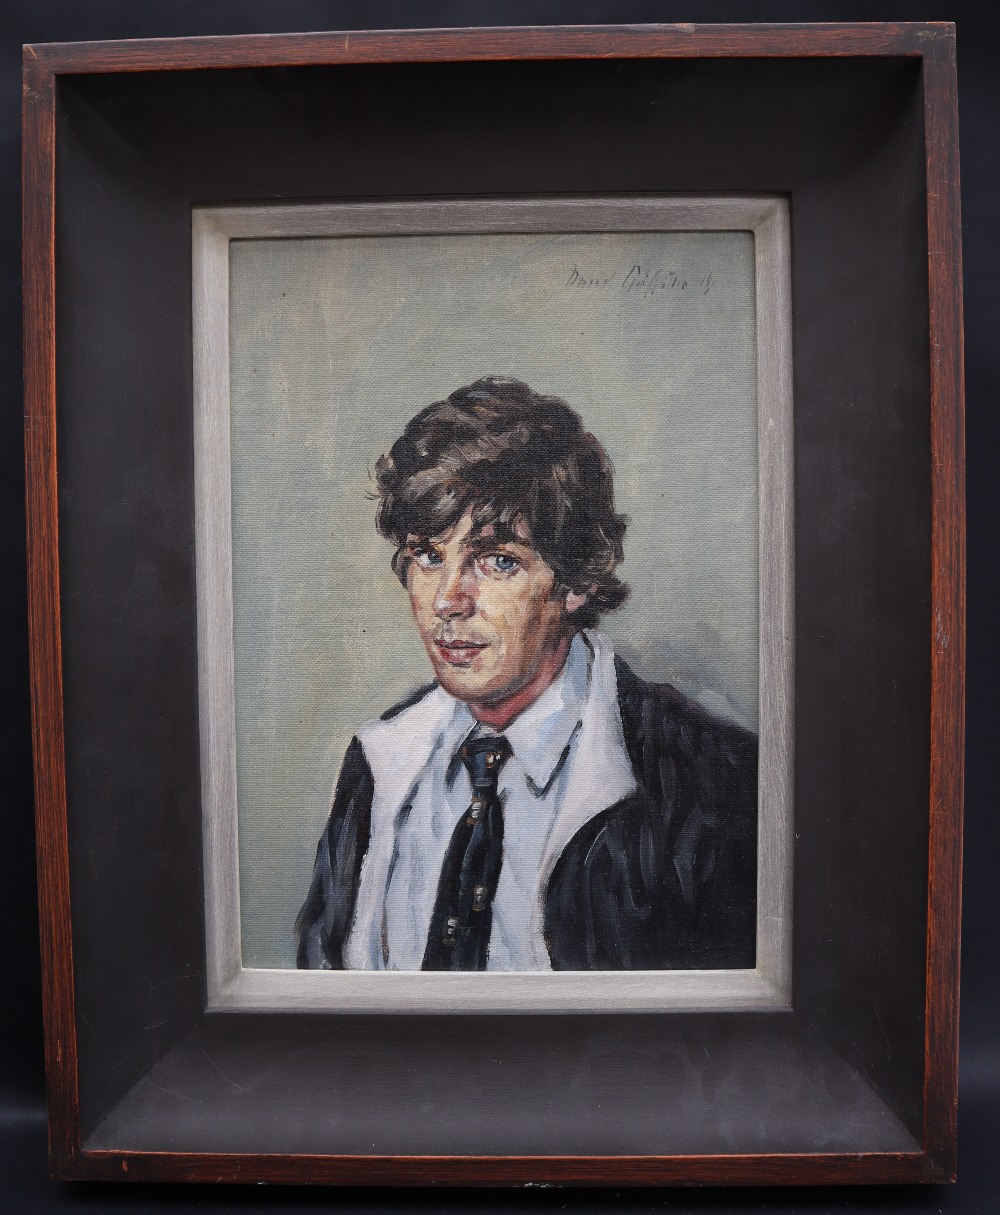 David Griffiths John Owen Head and shoulders portrait Oil on board Signed and dated 1981 34 x - Image 3 of 5